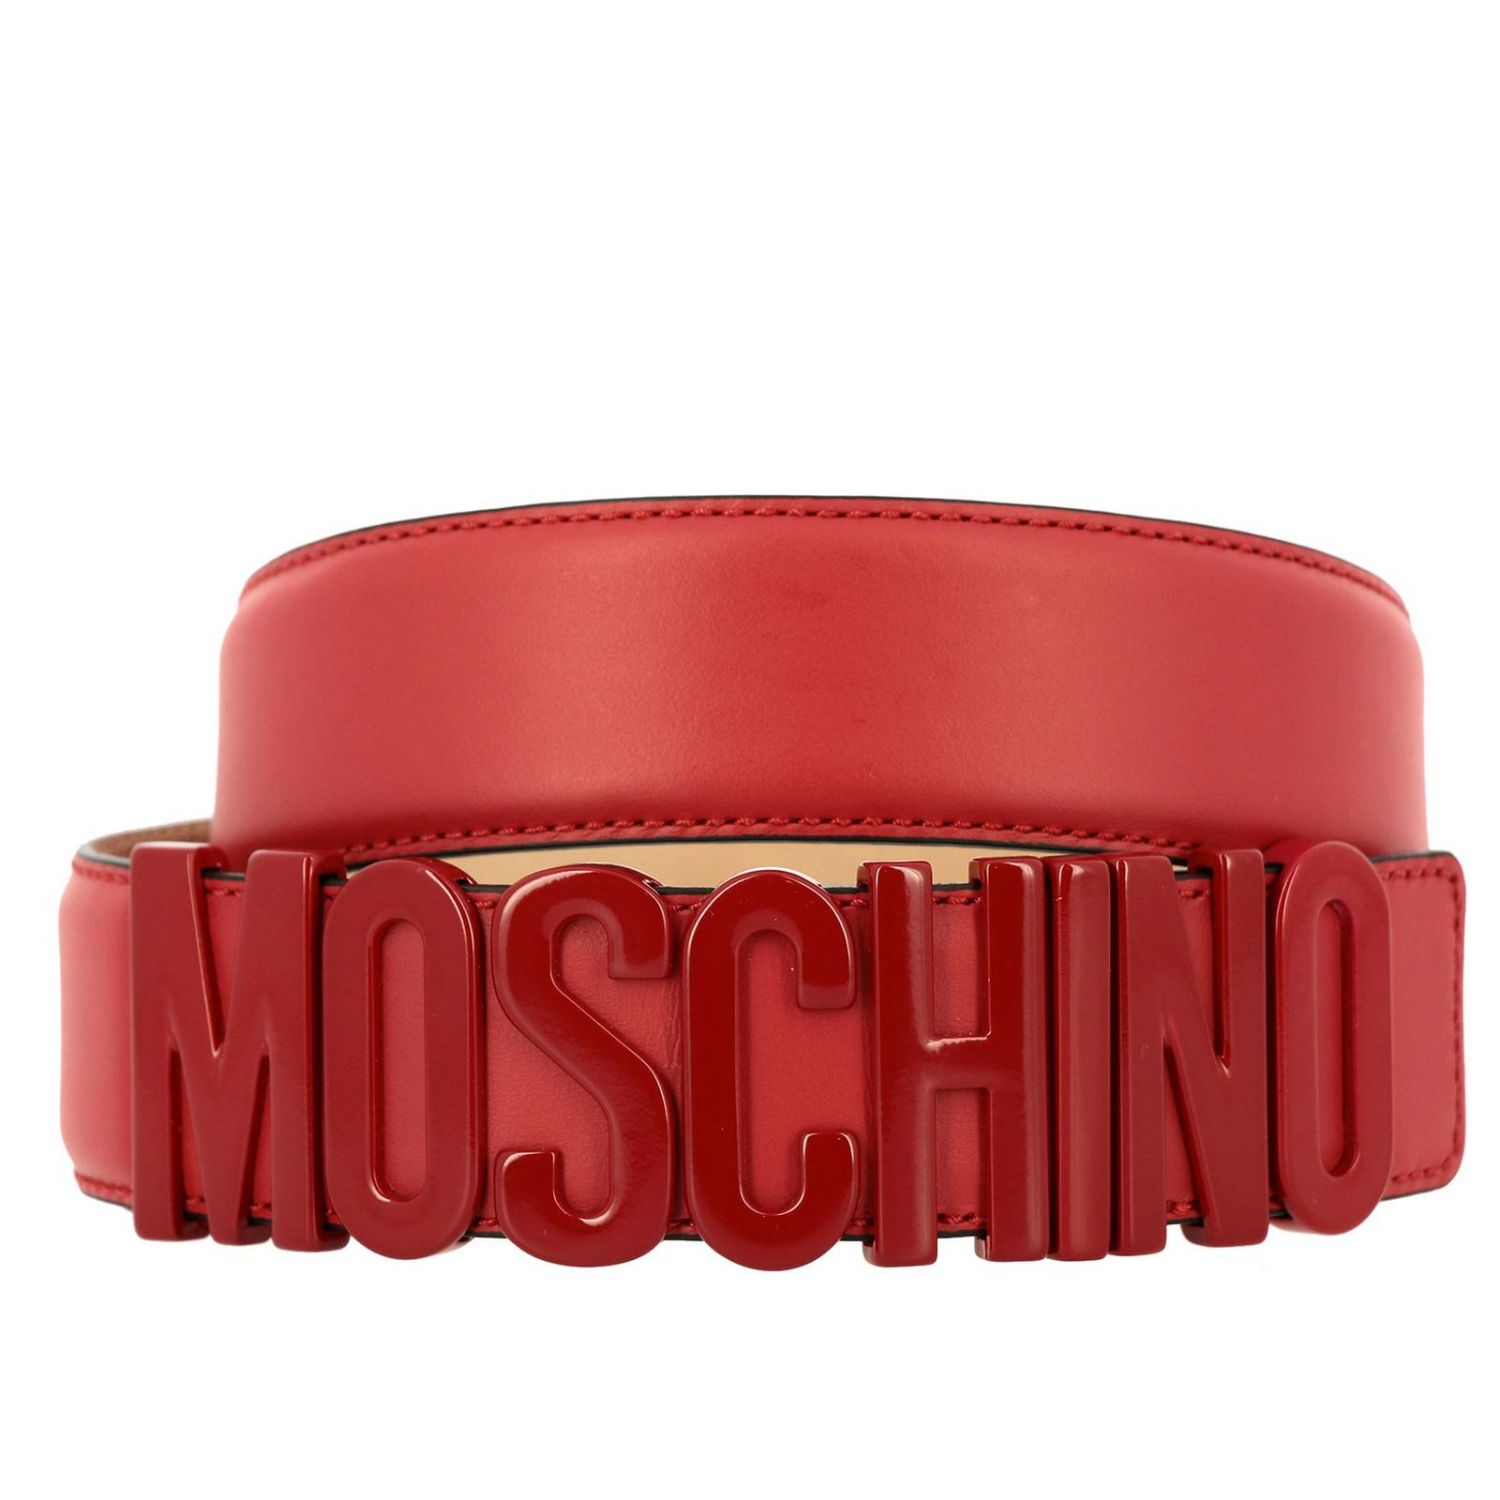 Boutique Moschino Outlet: Moschino Boutique belt with maxi logo - Red ...